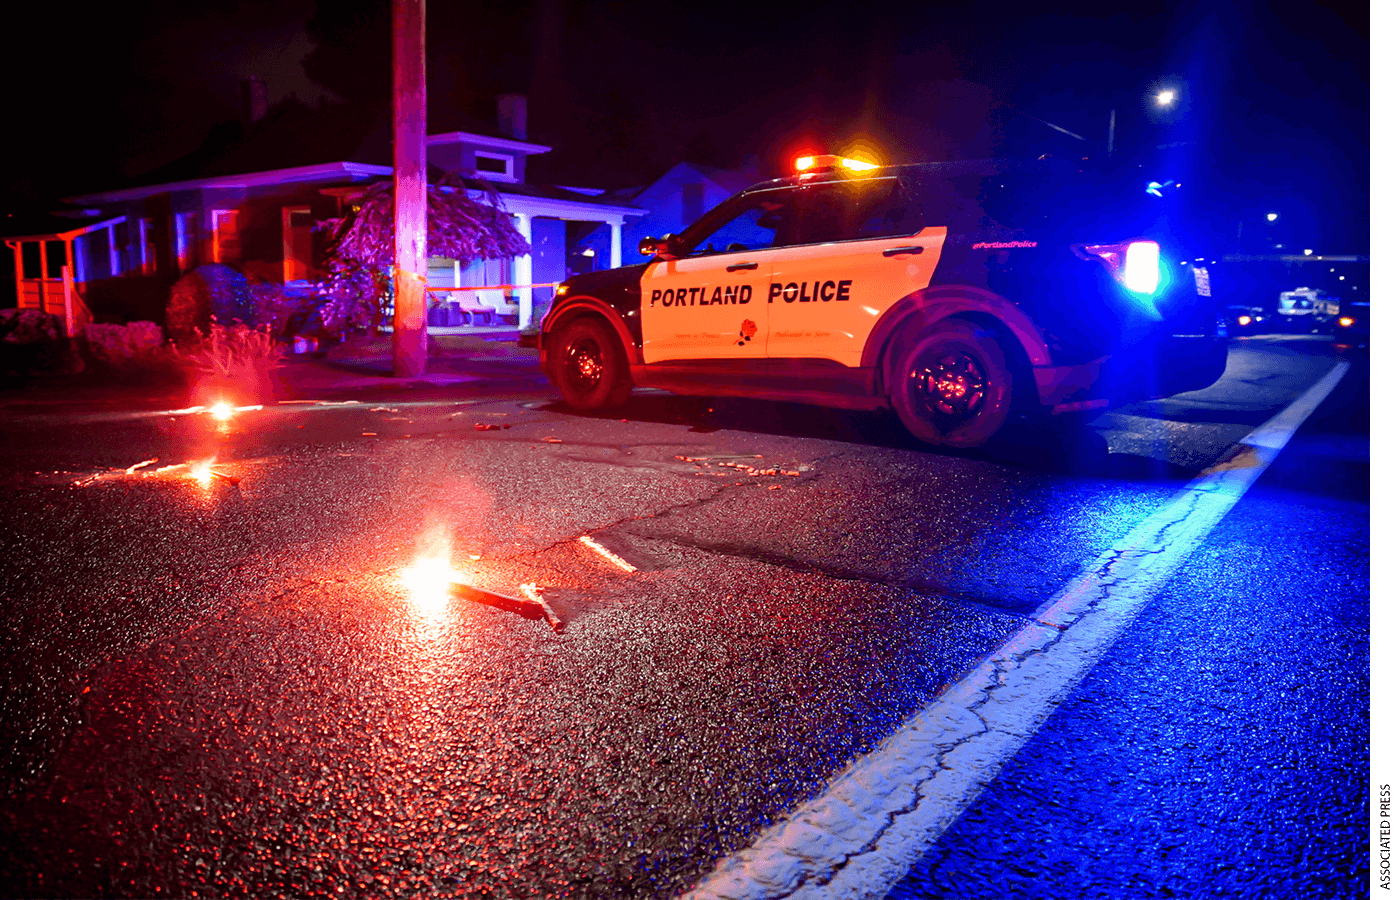 A Portland police car on a road at night